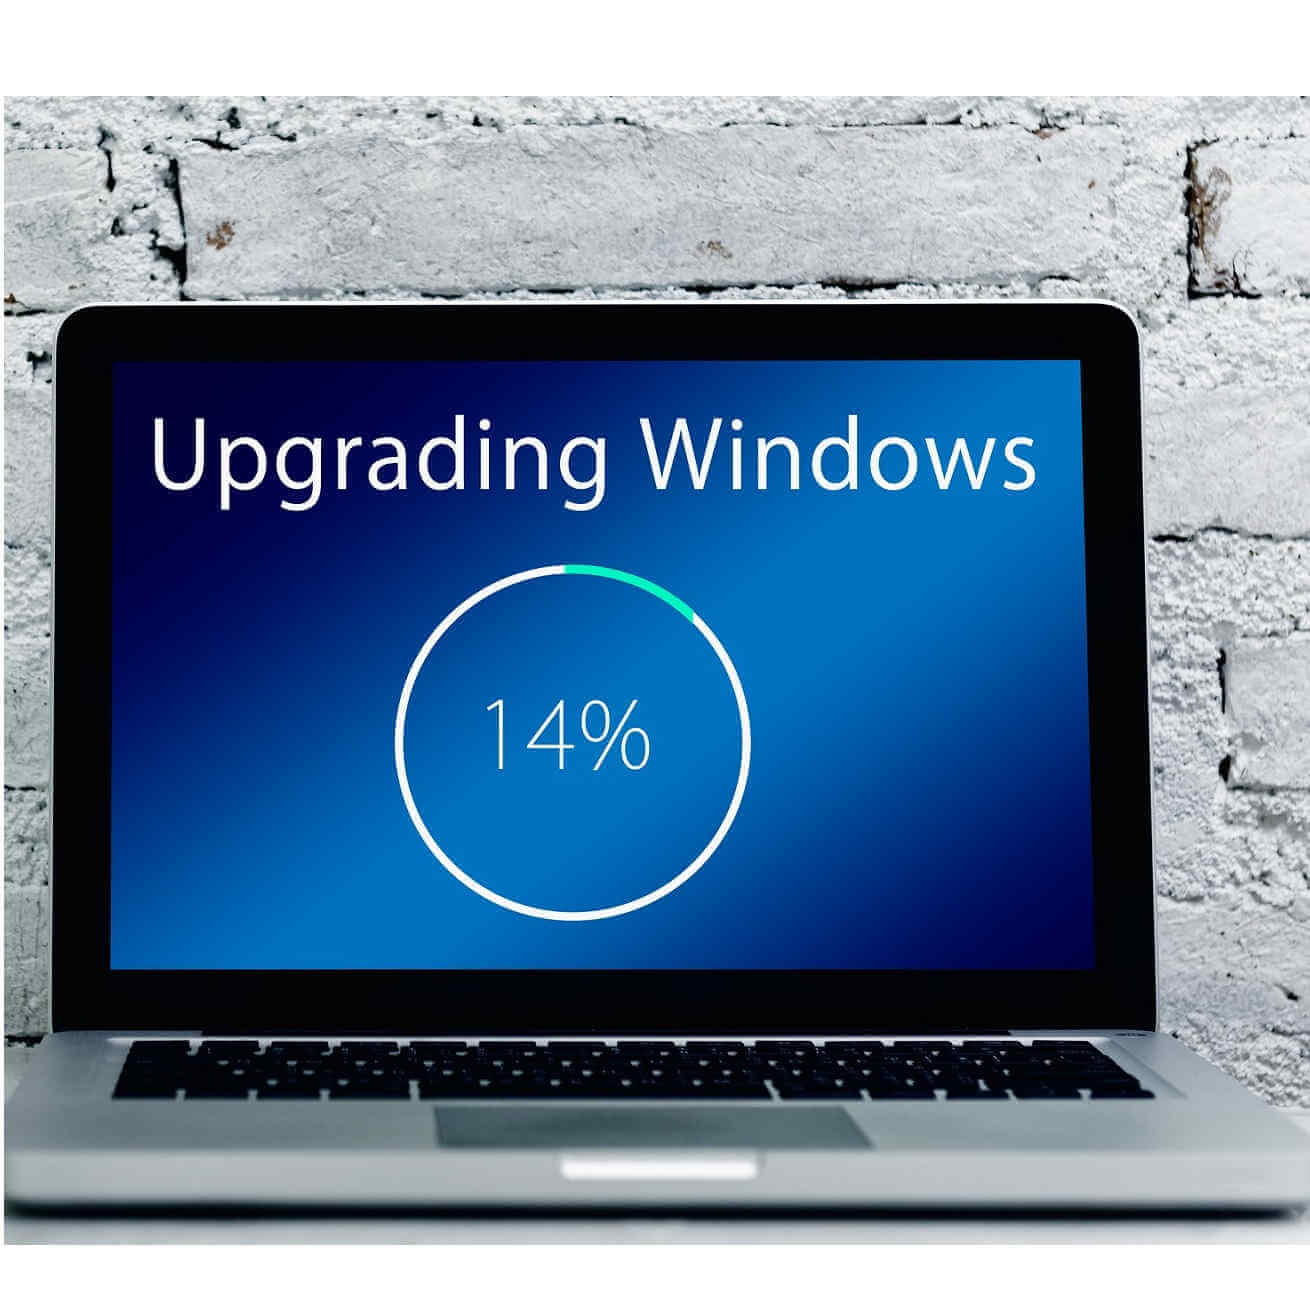 Windows 10 May Update downloads multiple times